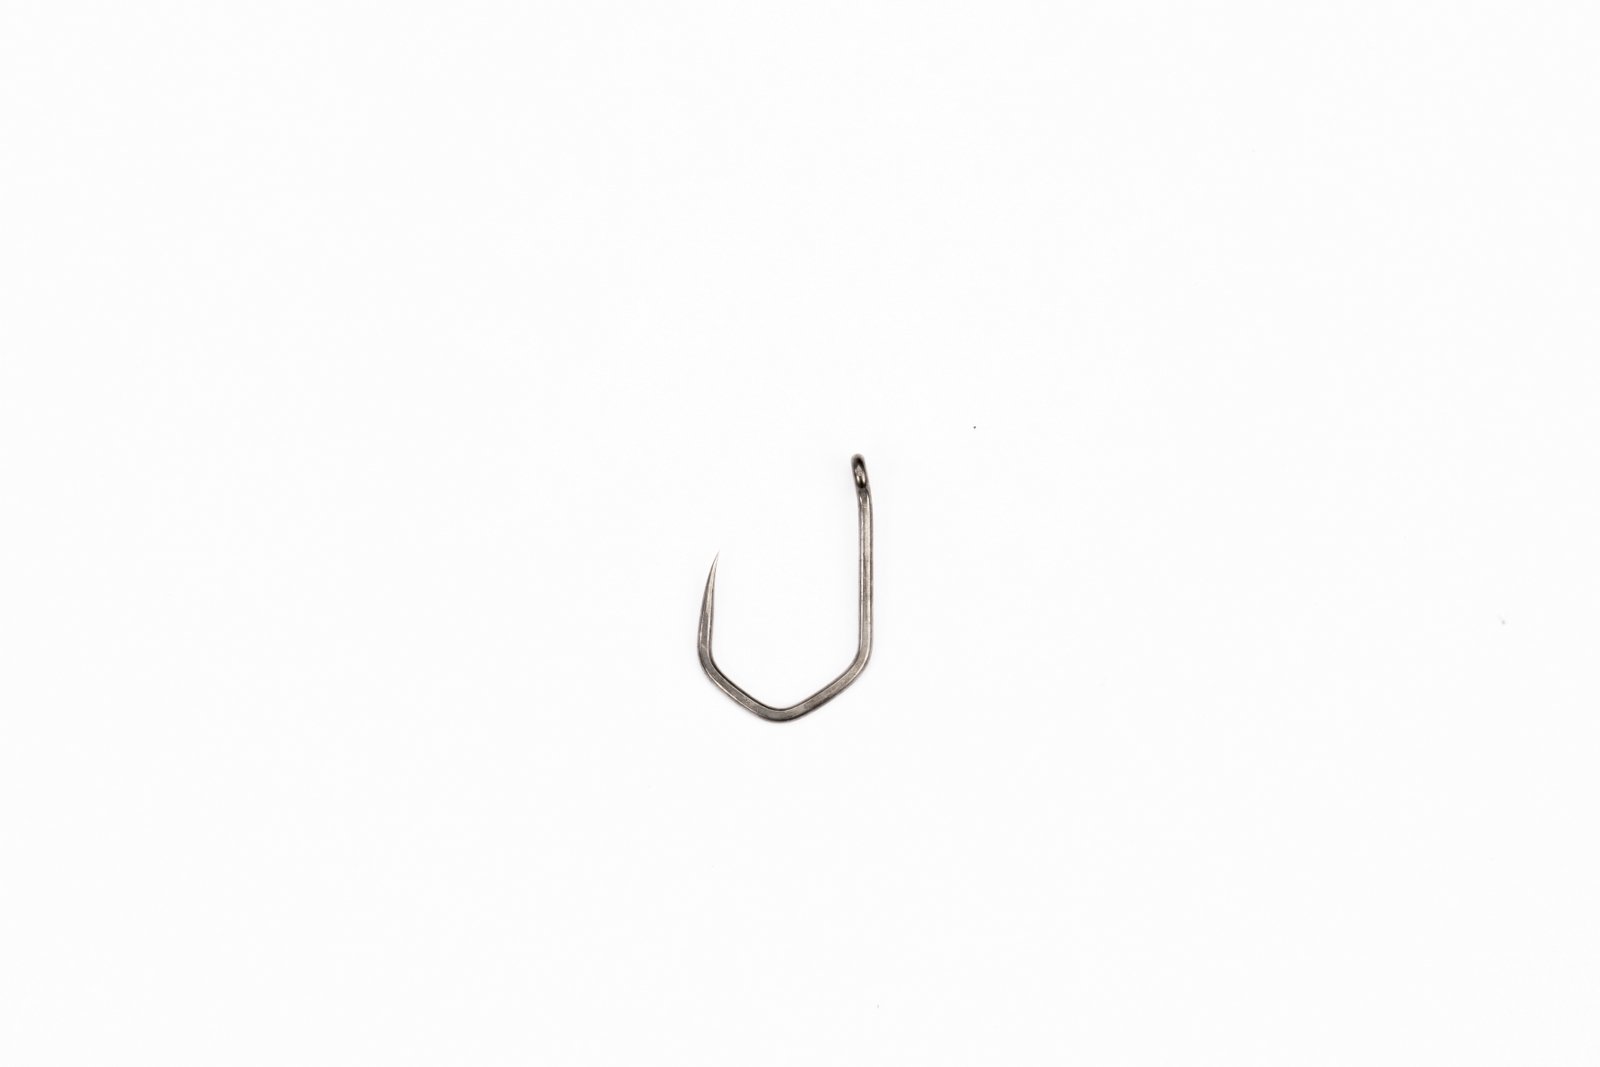 Nash Claw Size 7 Barbless Hooks & Sharpening Tackle T6177 International Shop Europe